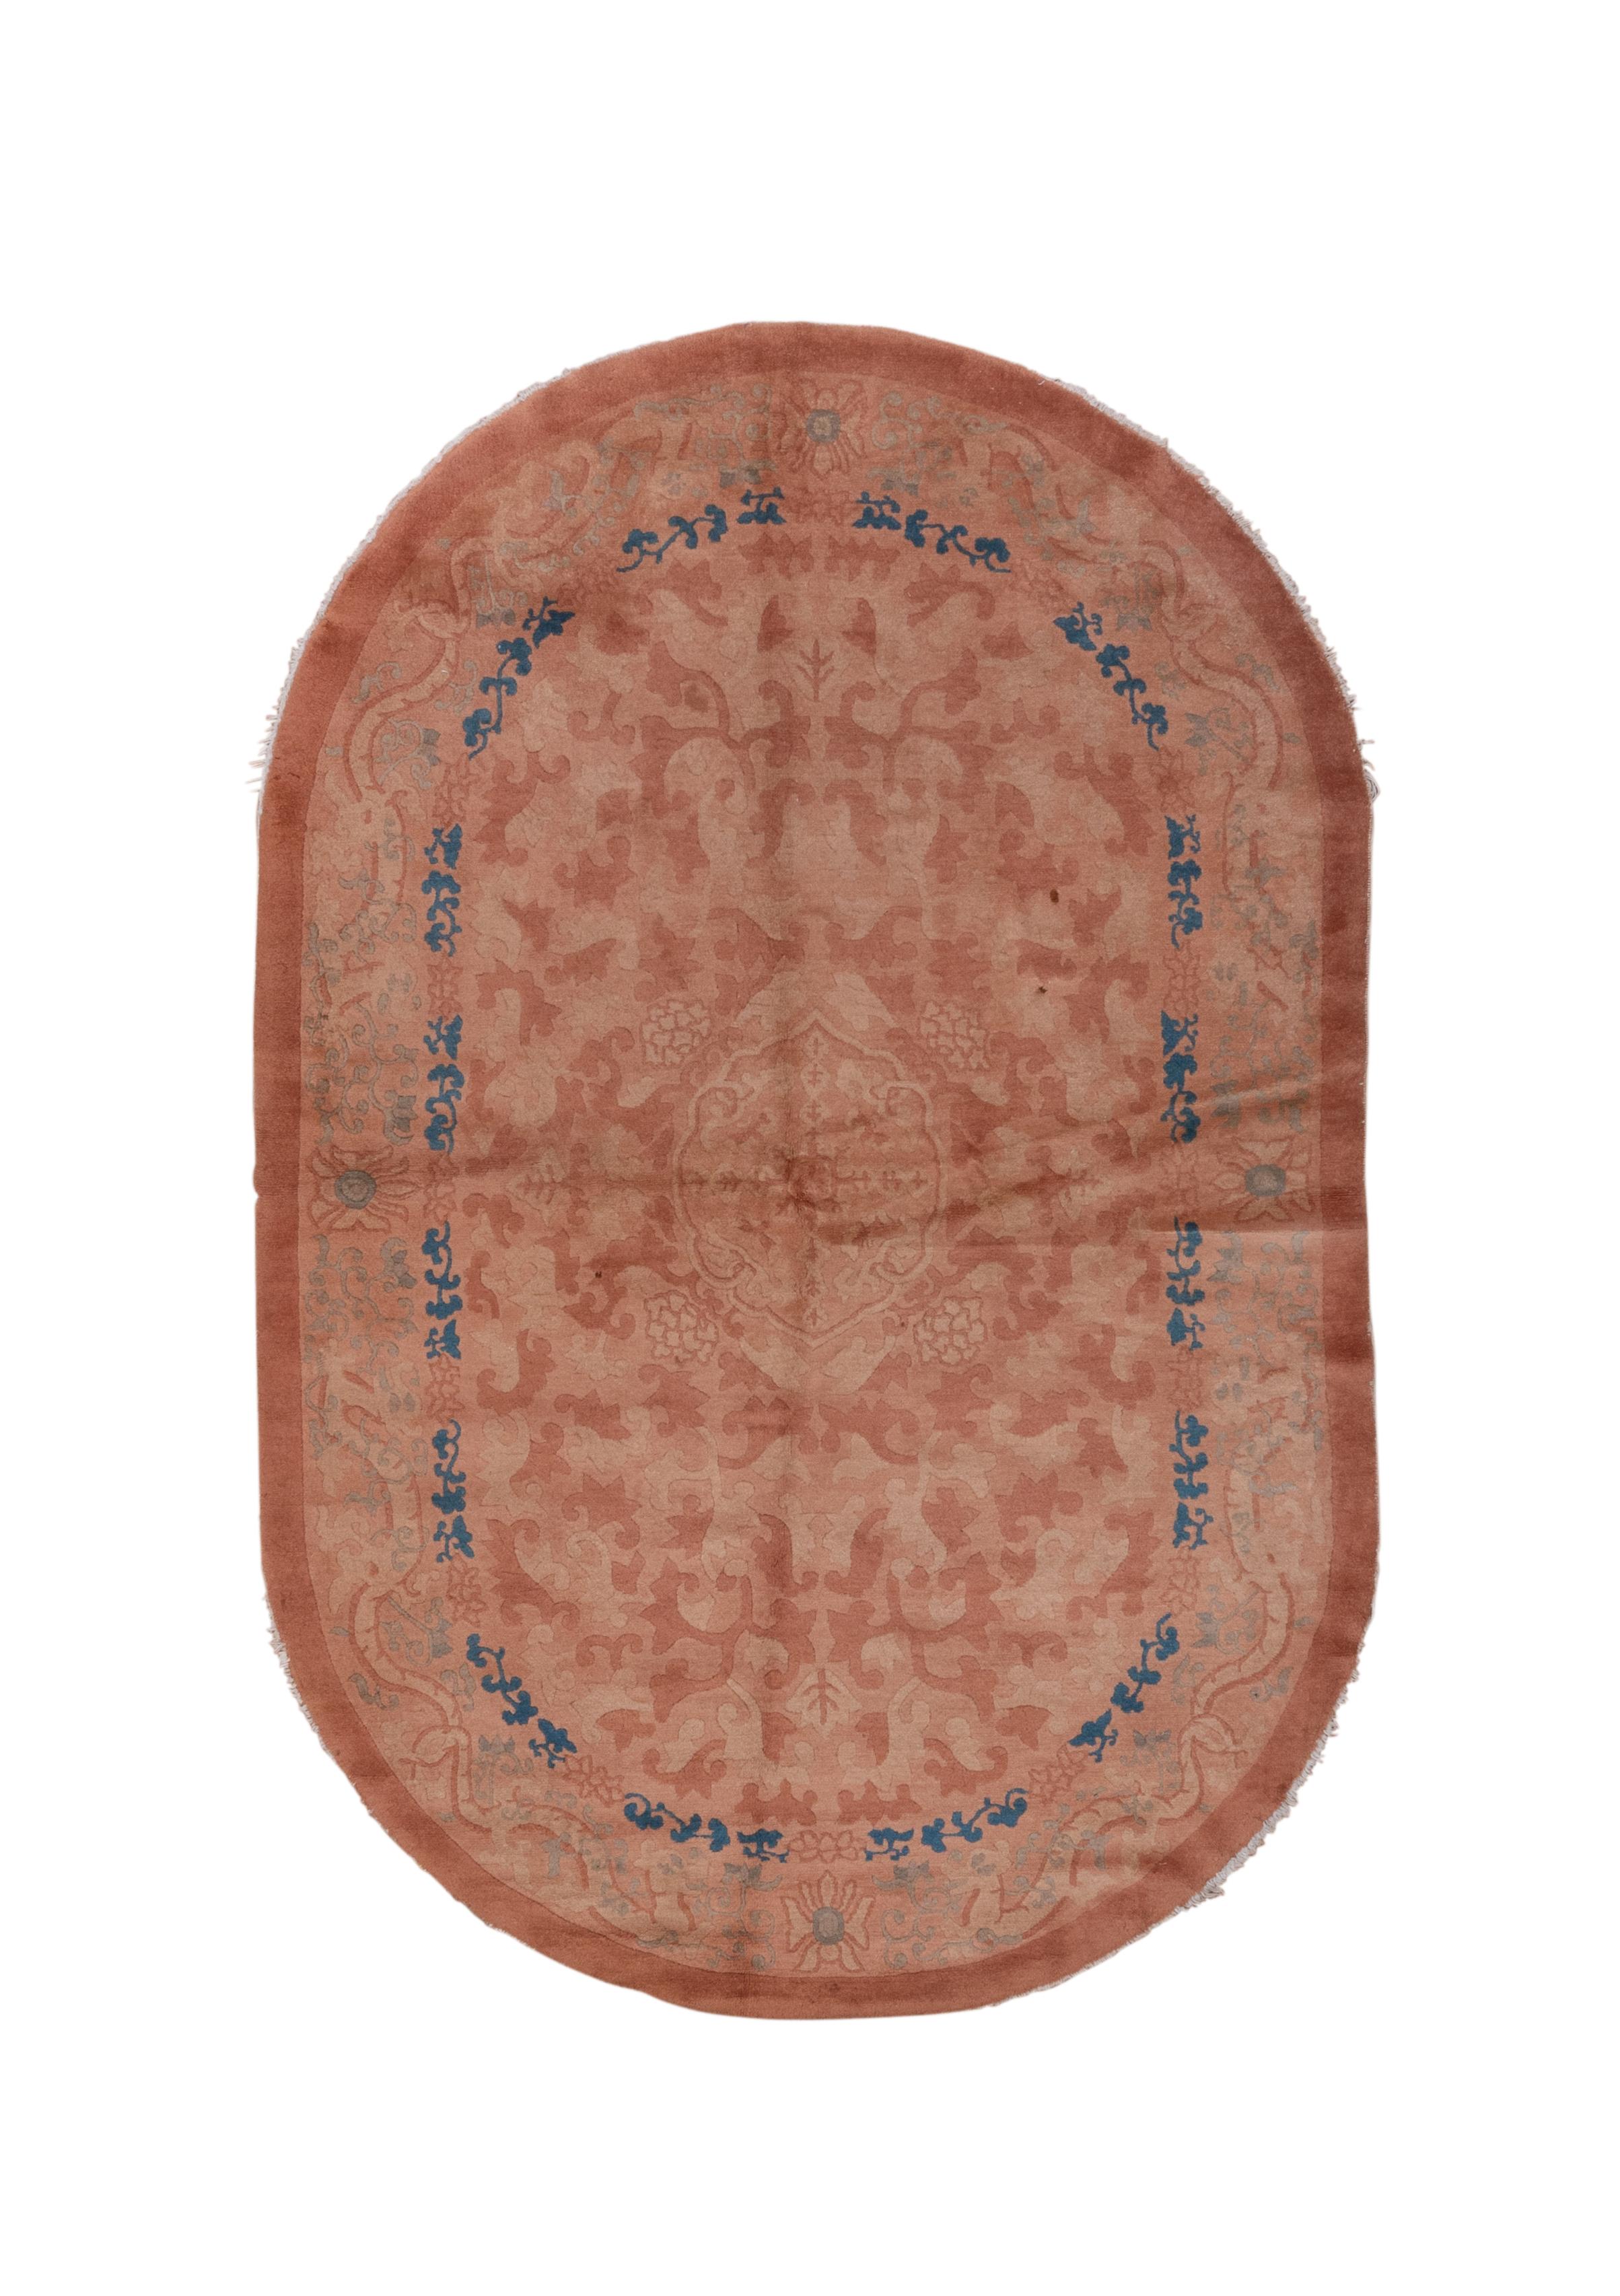 Modern Art Deco Chinese Oval Rug
Salmon color
5'2x8.